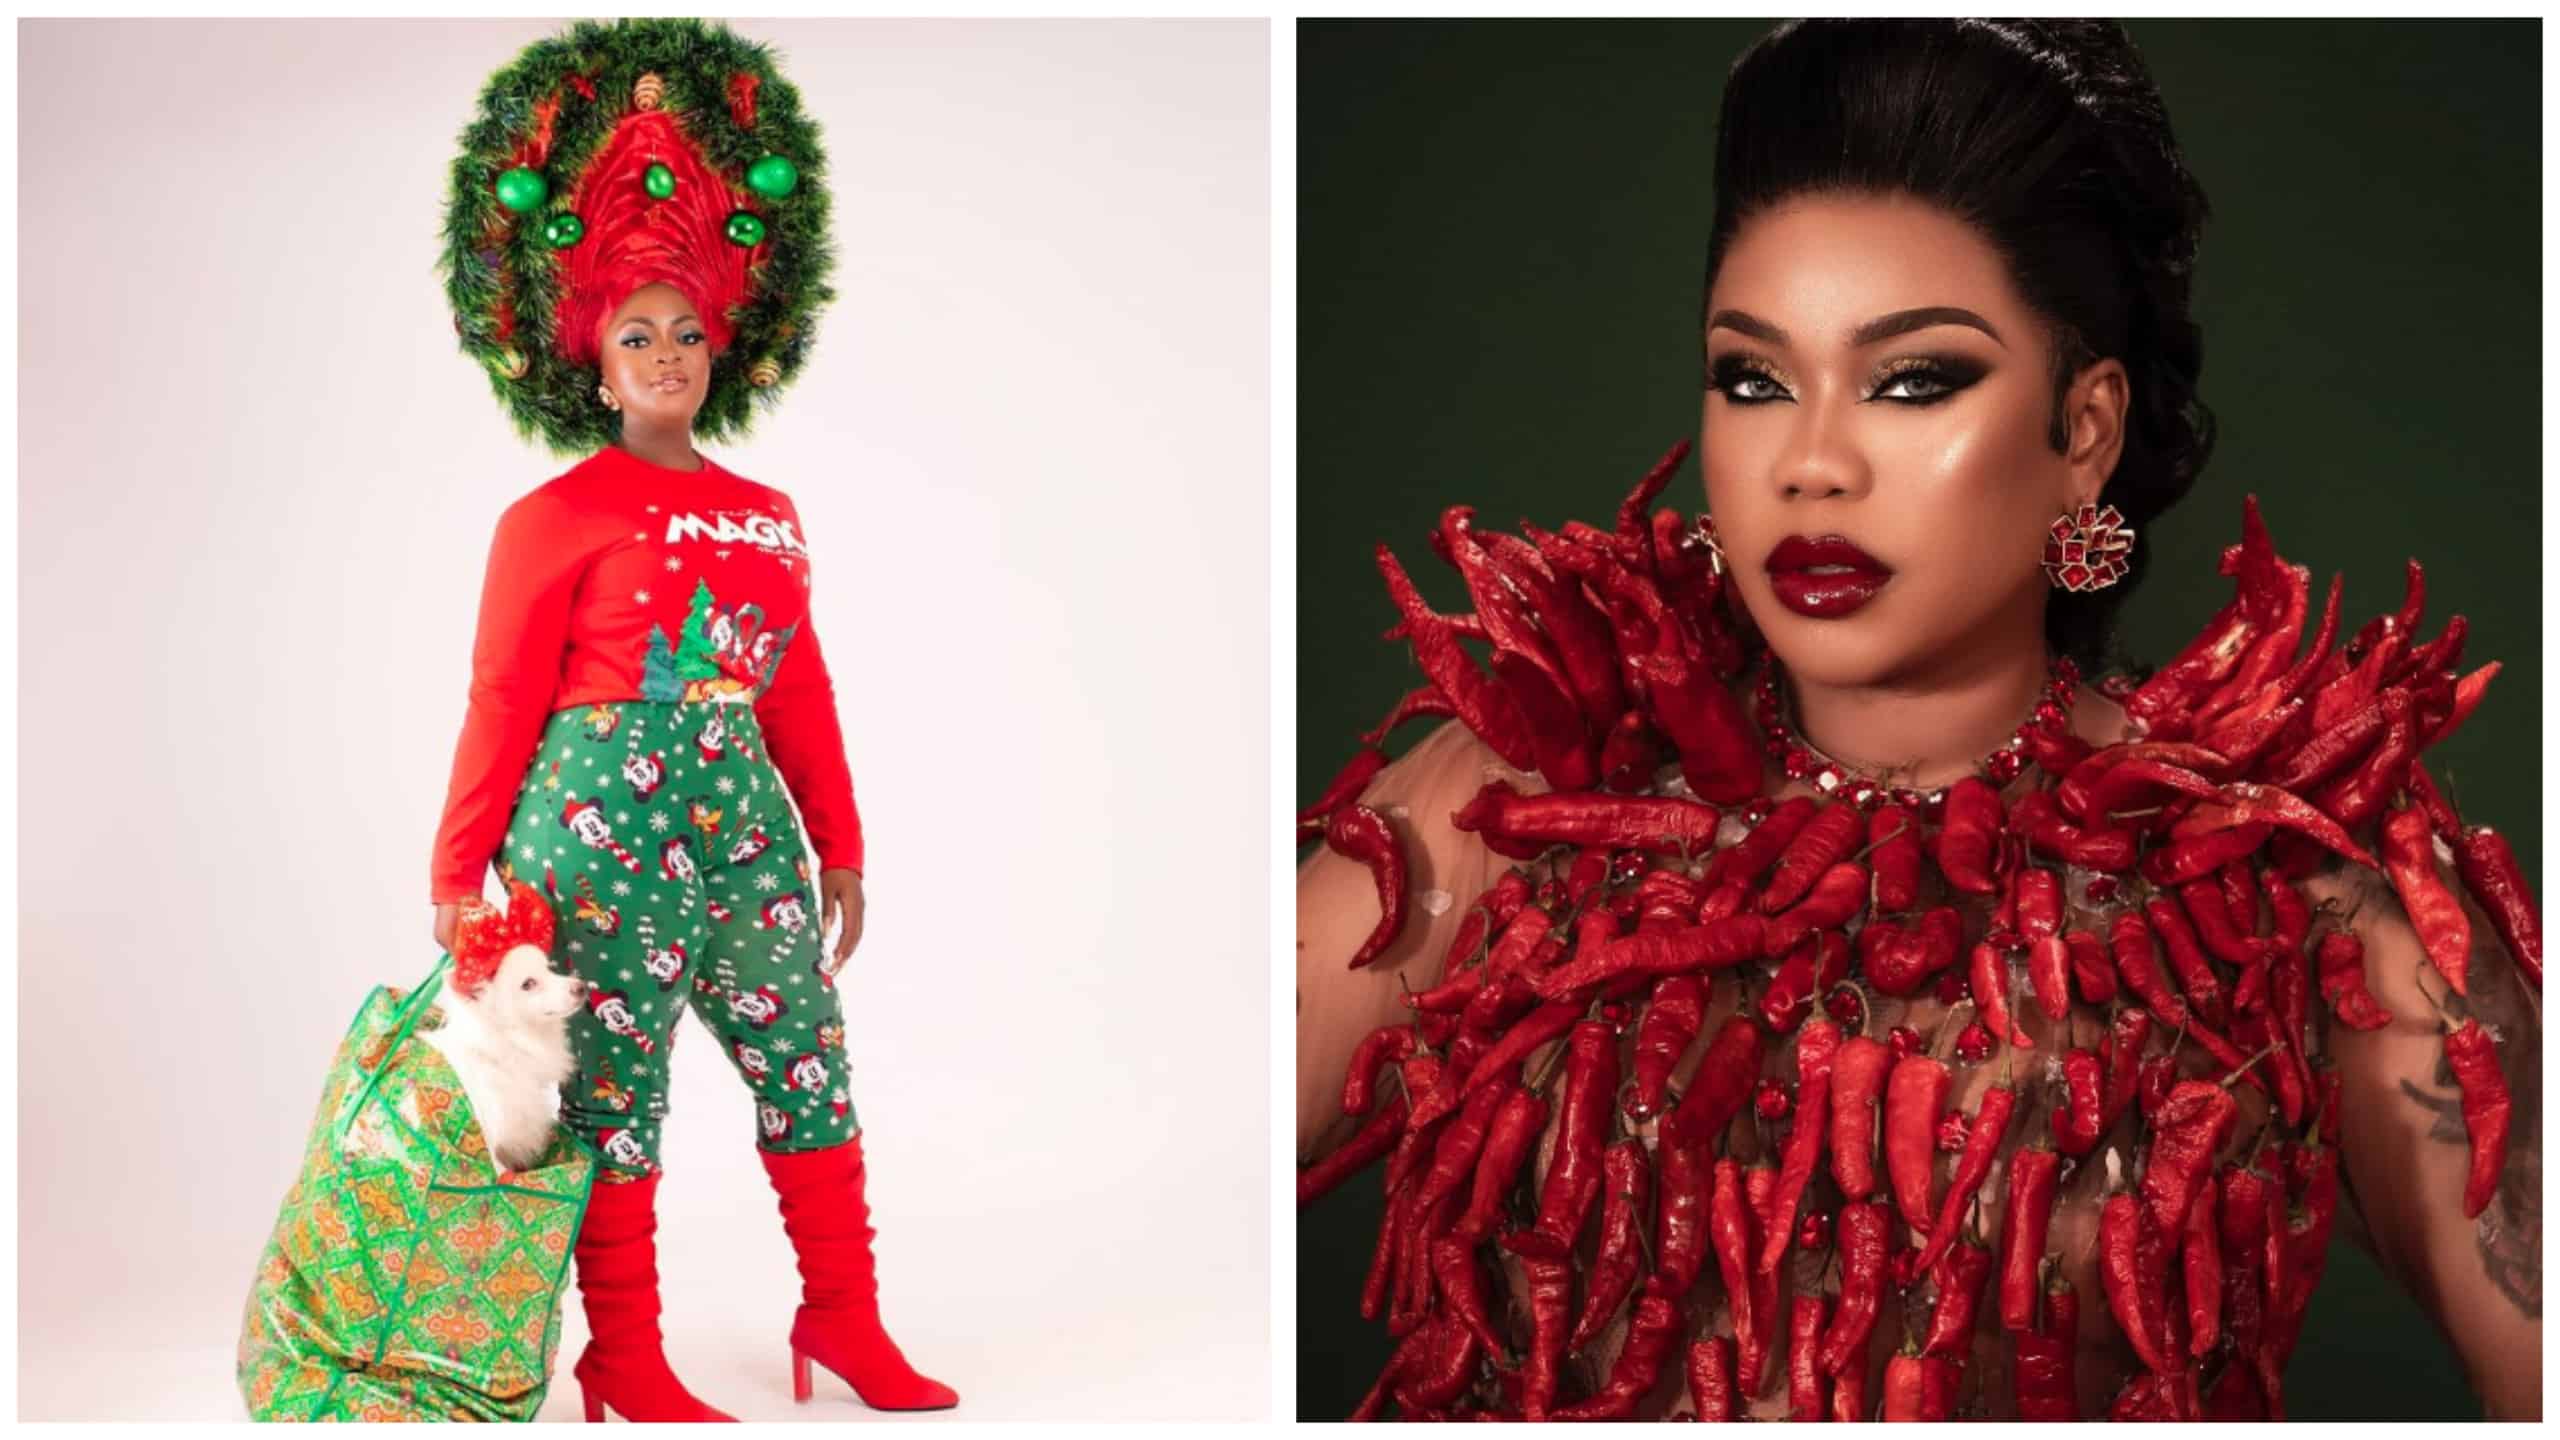 Five Controversial Celebrity Christmas Themed Photos That Sparked Reactions Online